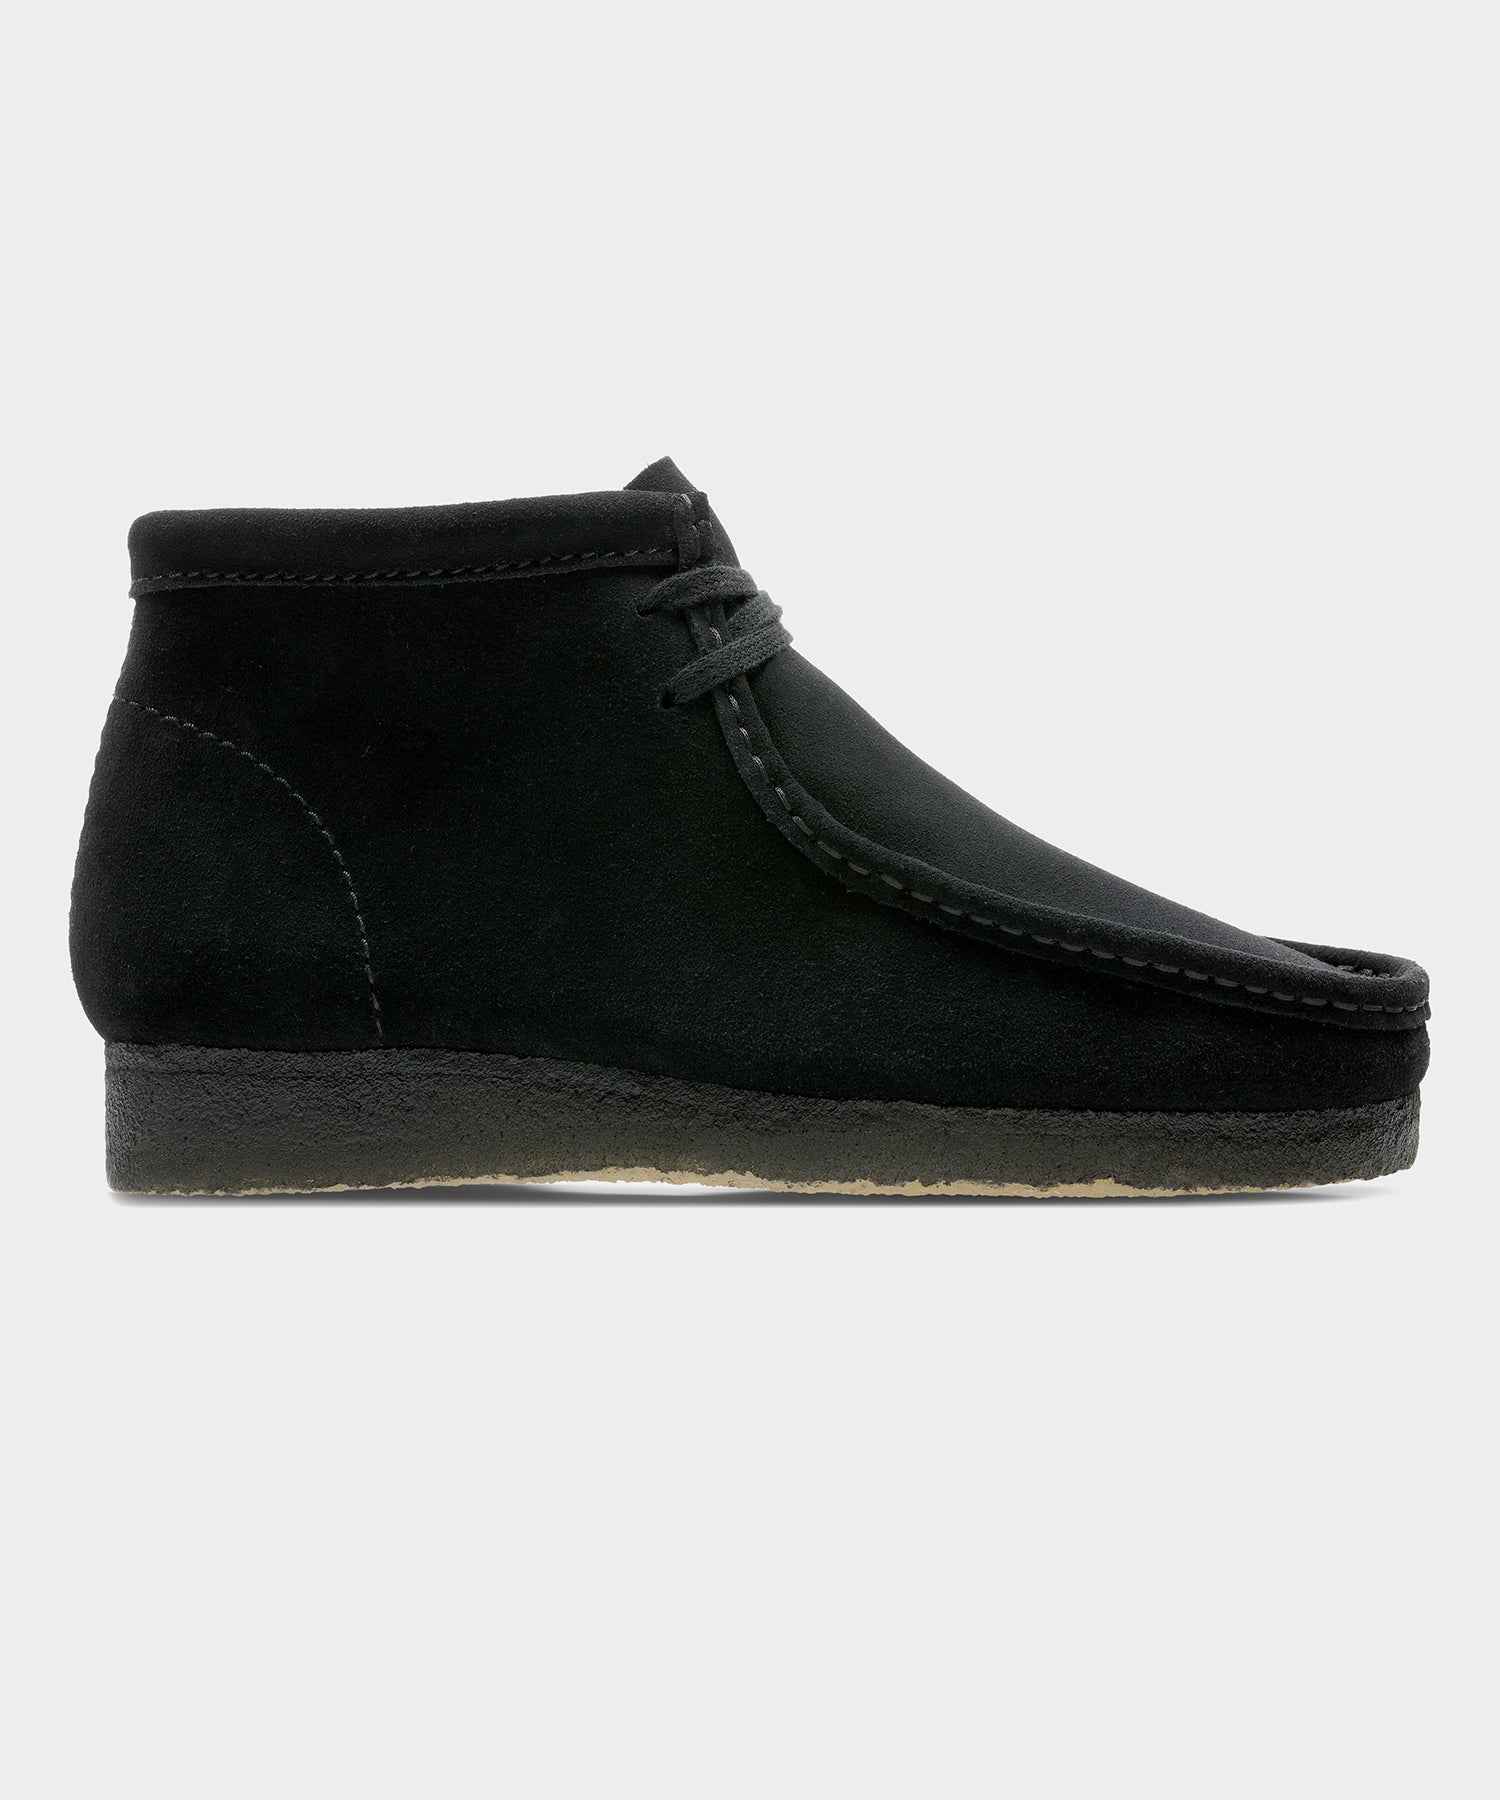 Clarks Wallabee Boot in Black Suede